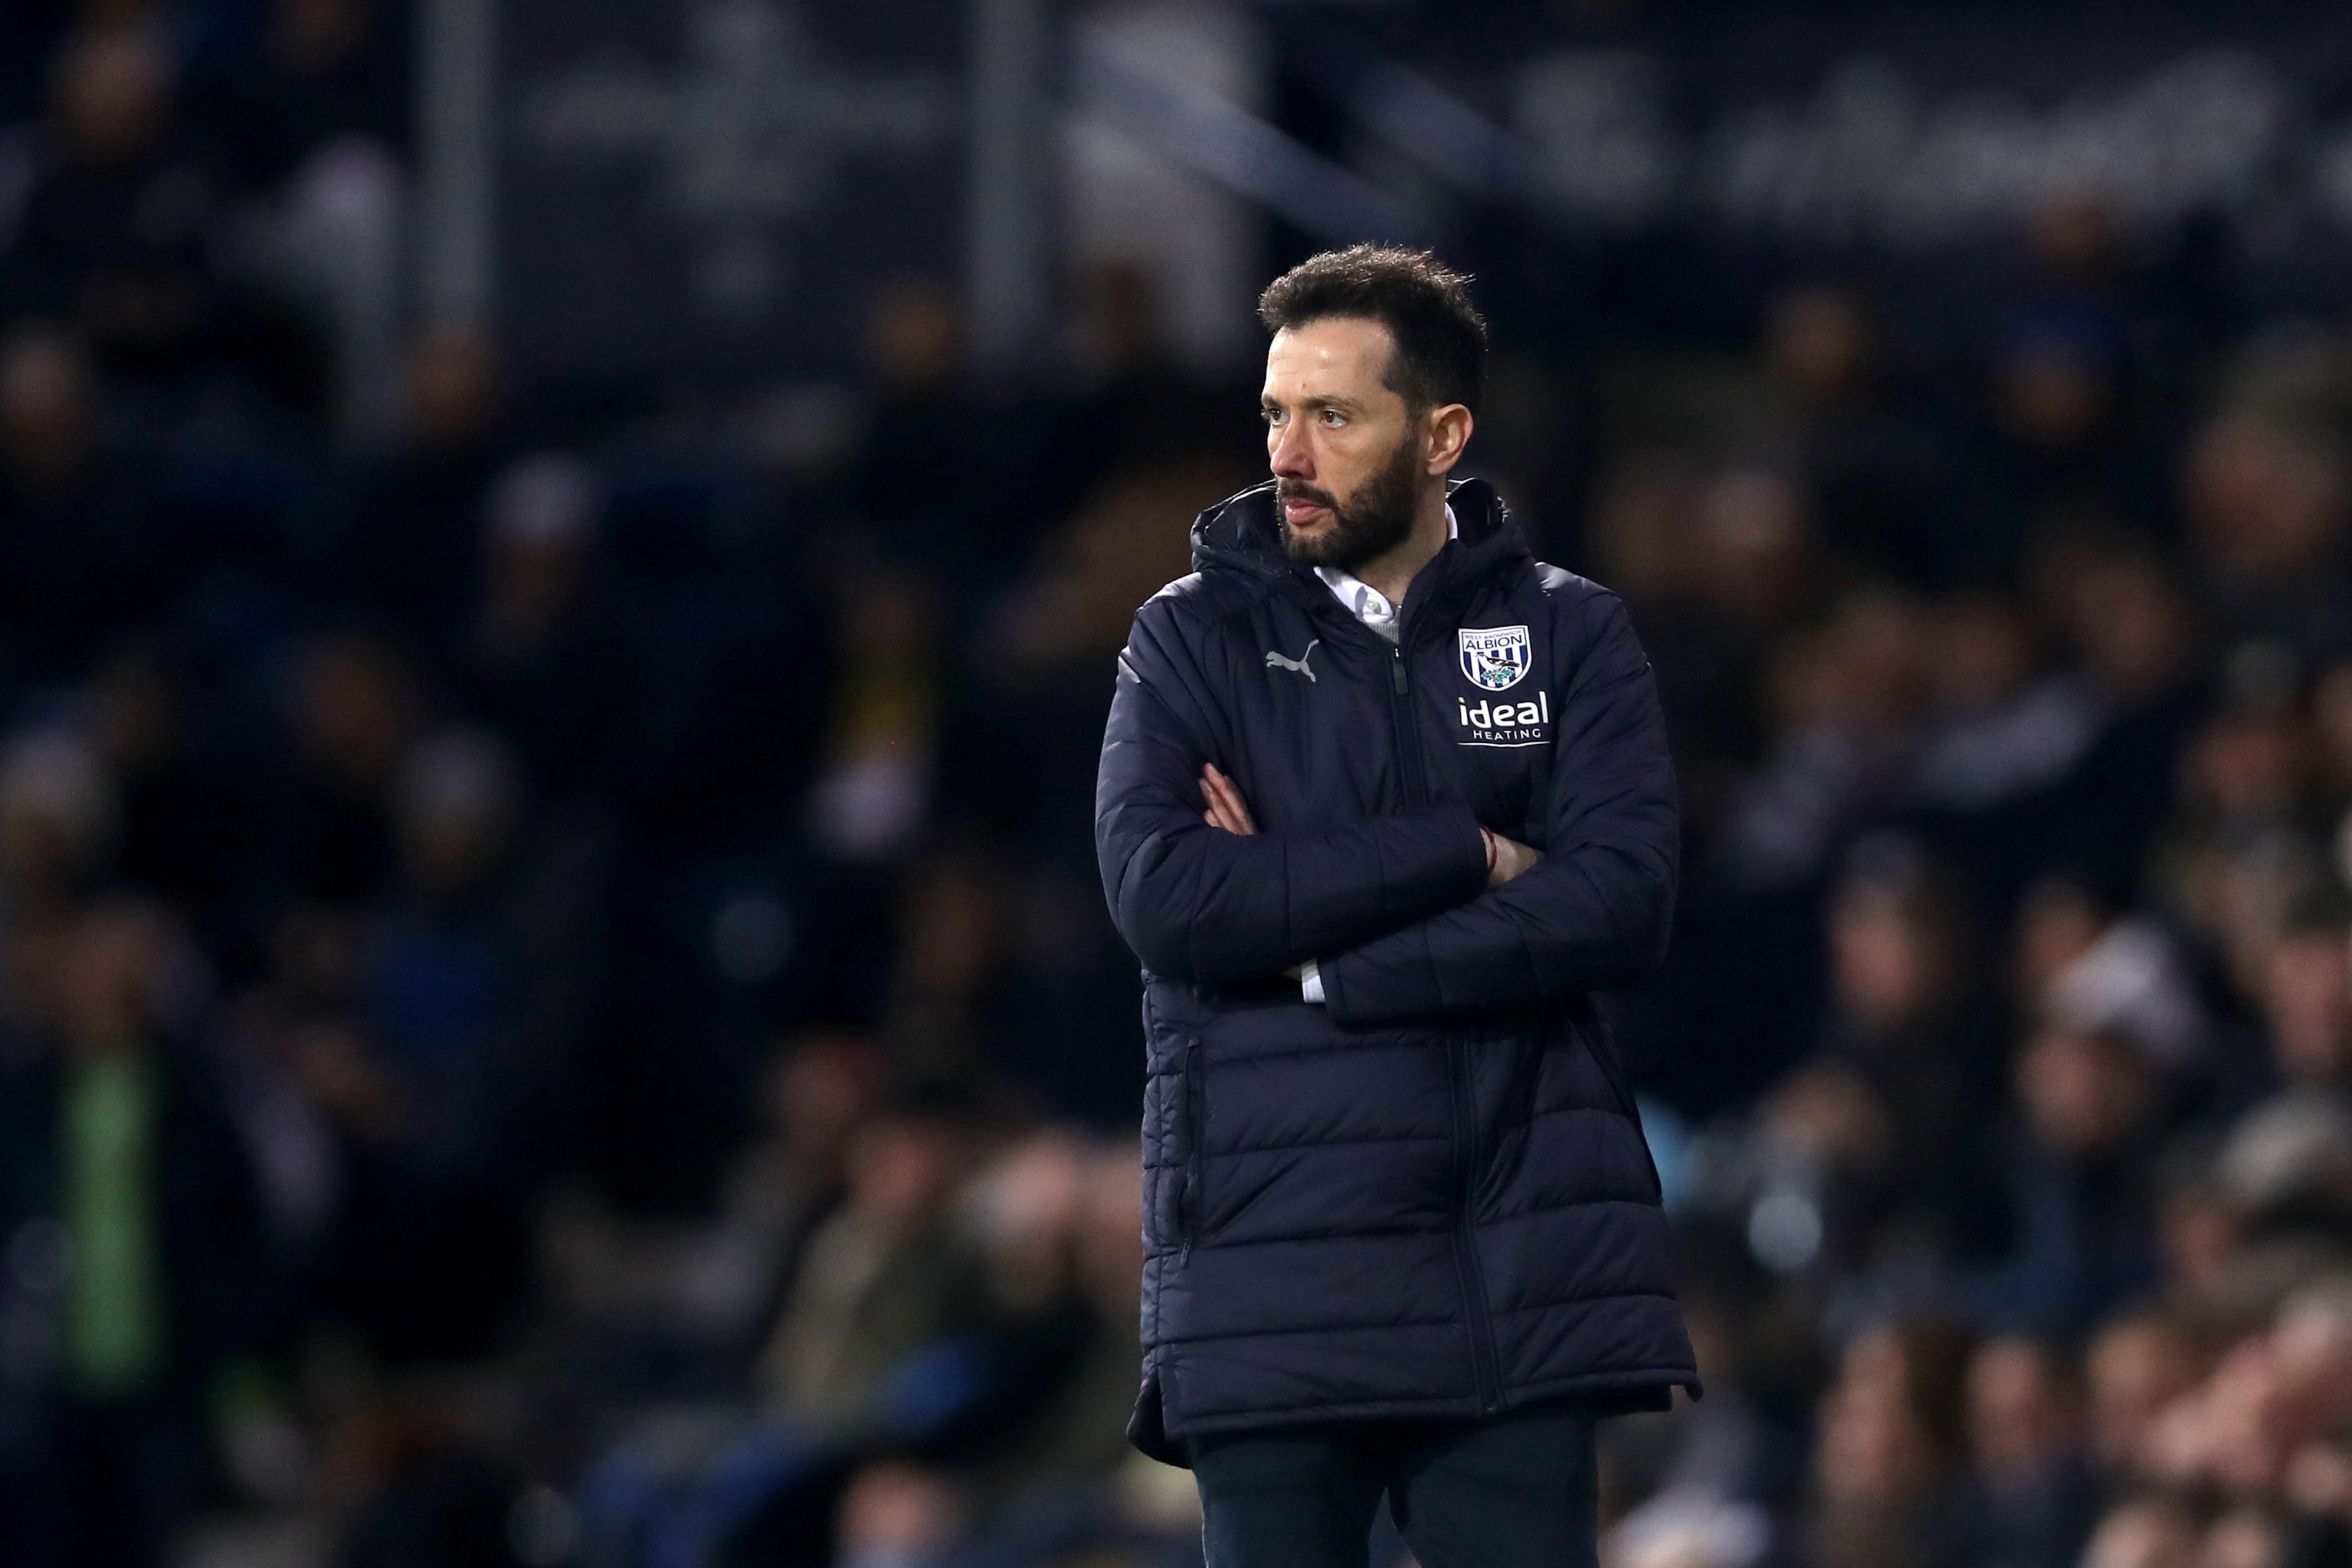 Carlos Corberán folding his arms while wearing an Albion coat on the side of the pitch at The Hawthorns during the game against Rotherham United